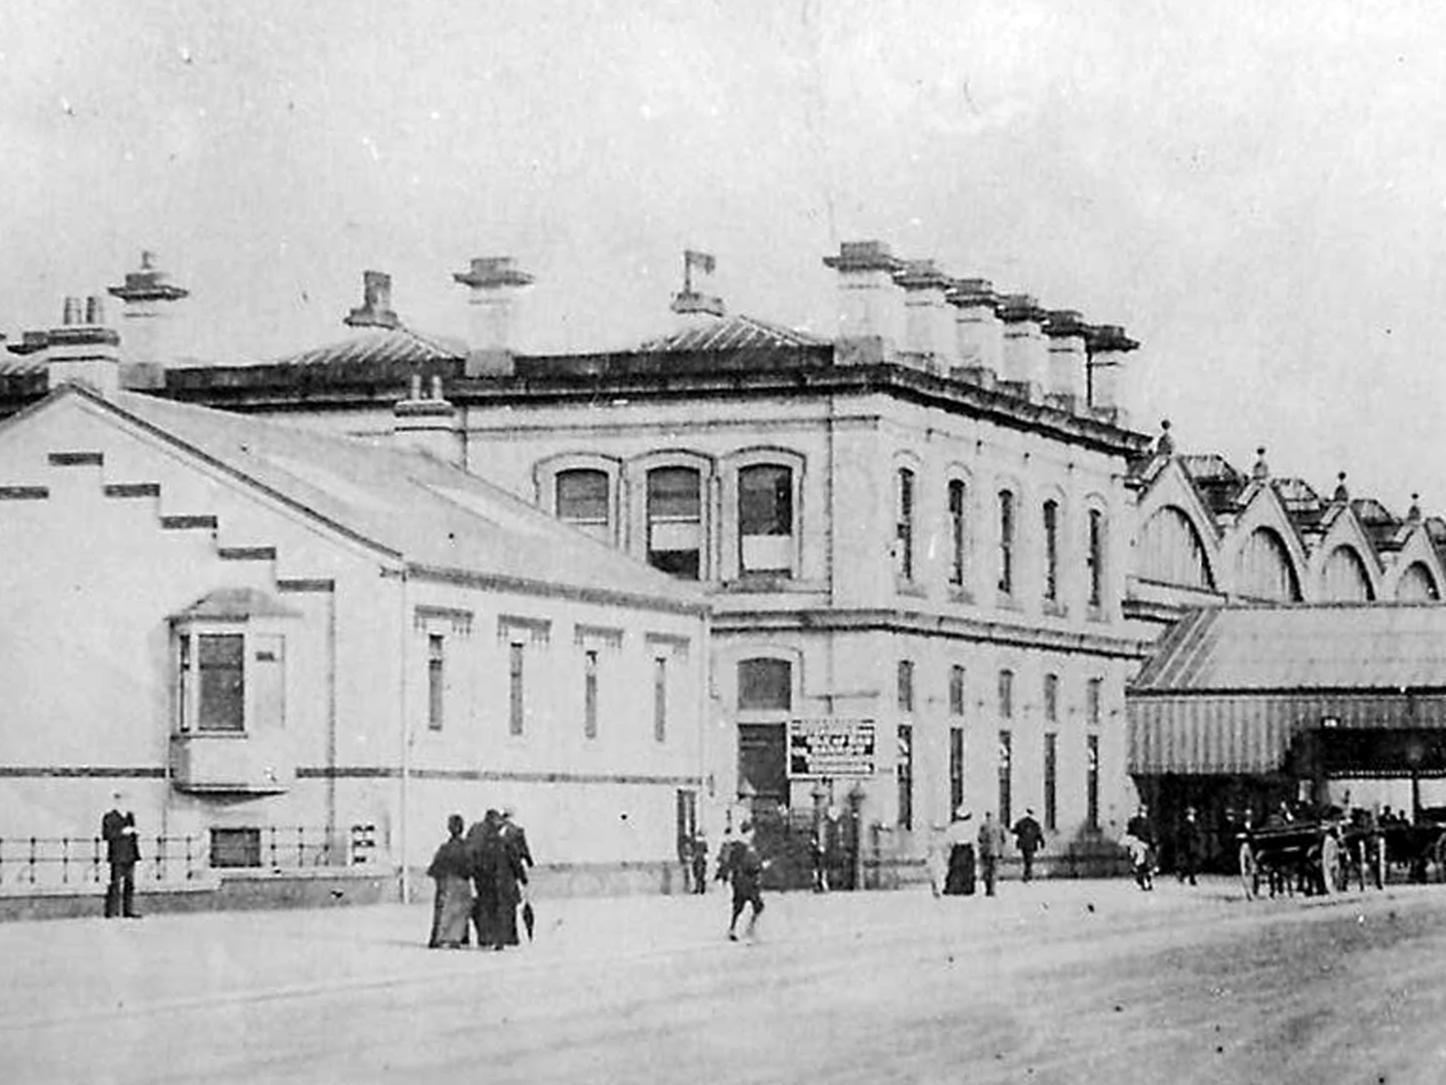 The L&YR Company built the large rail station for Fleetwood in 1883 opposite the Queens Terrace buildings. Photo courtesy of Bill Curtiss Images of Fleetwood.